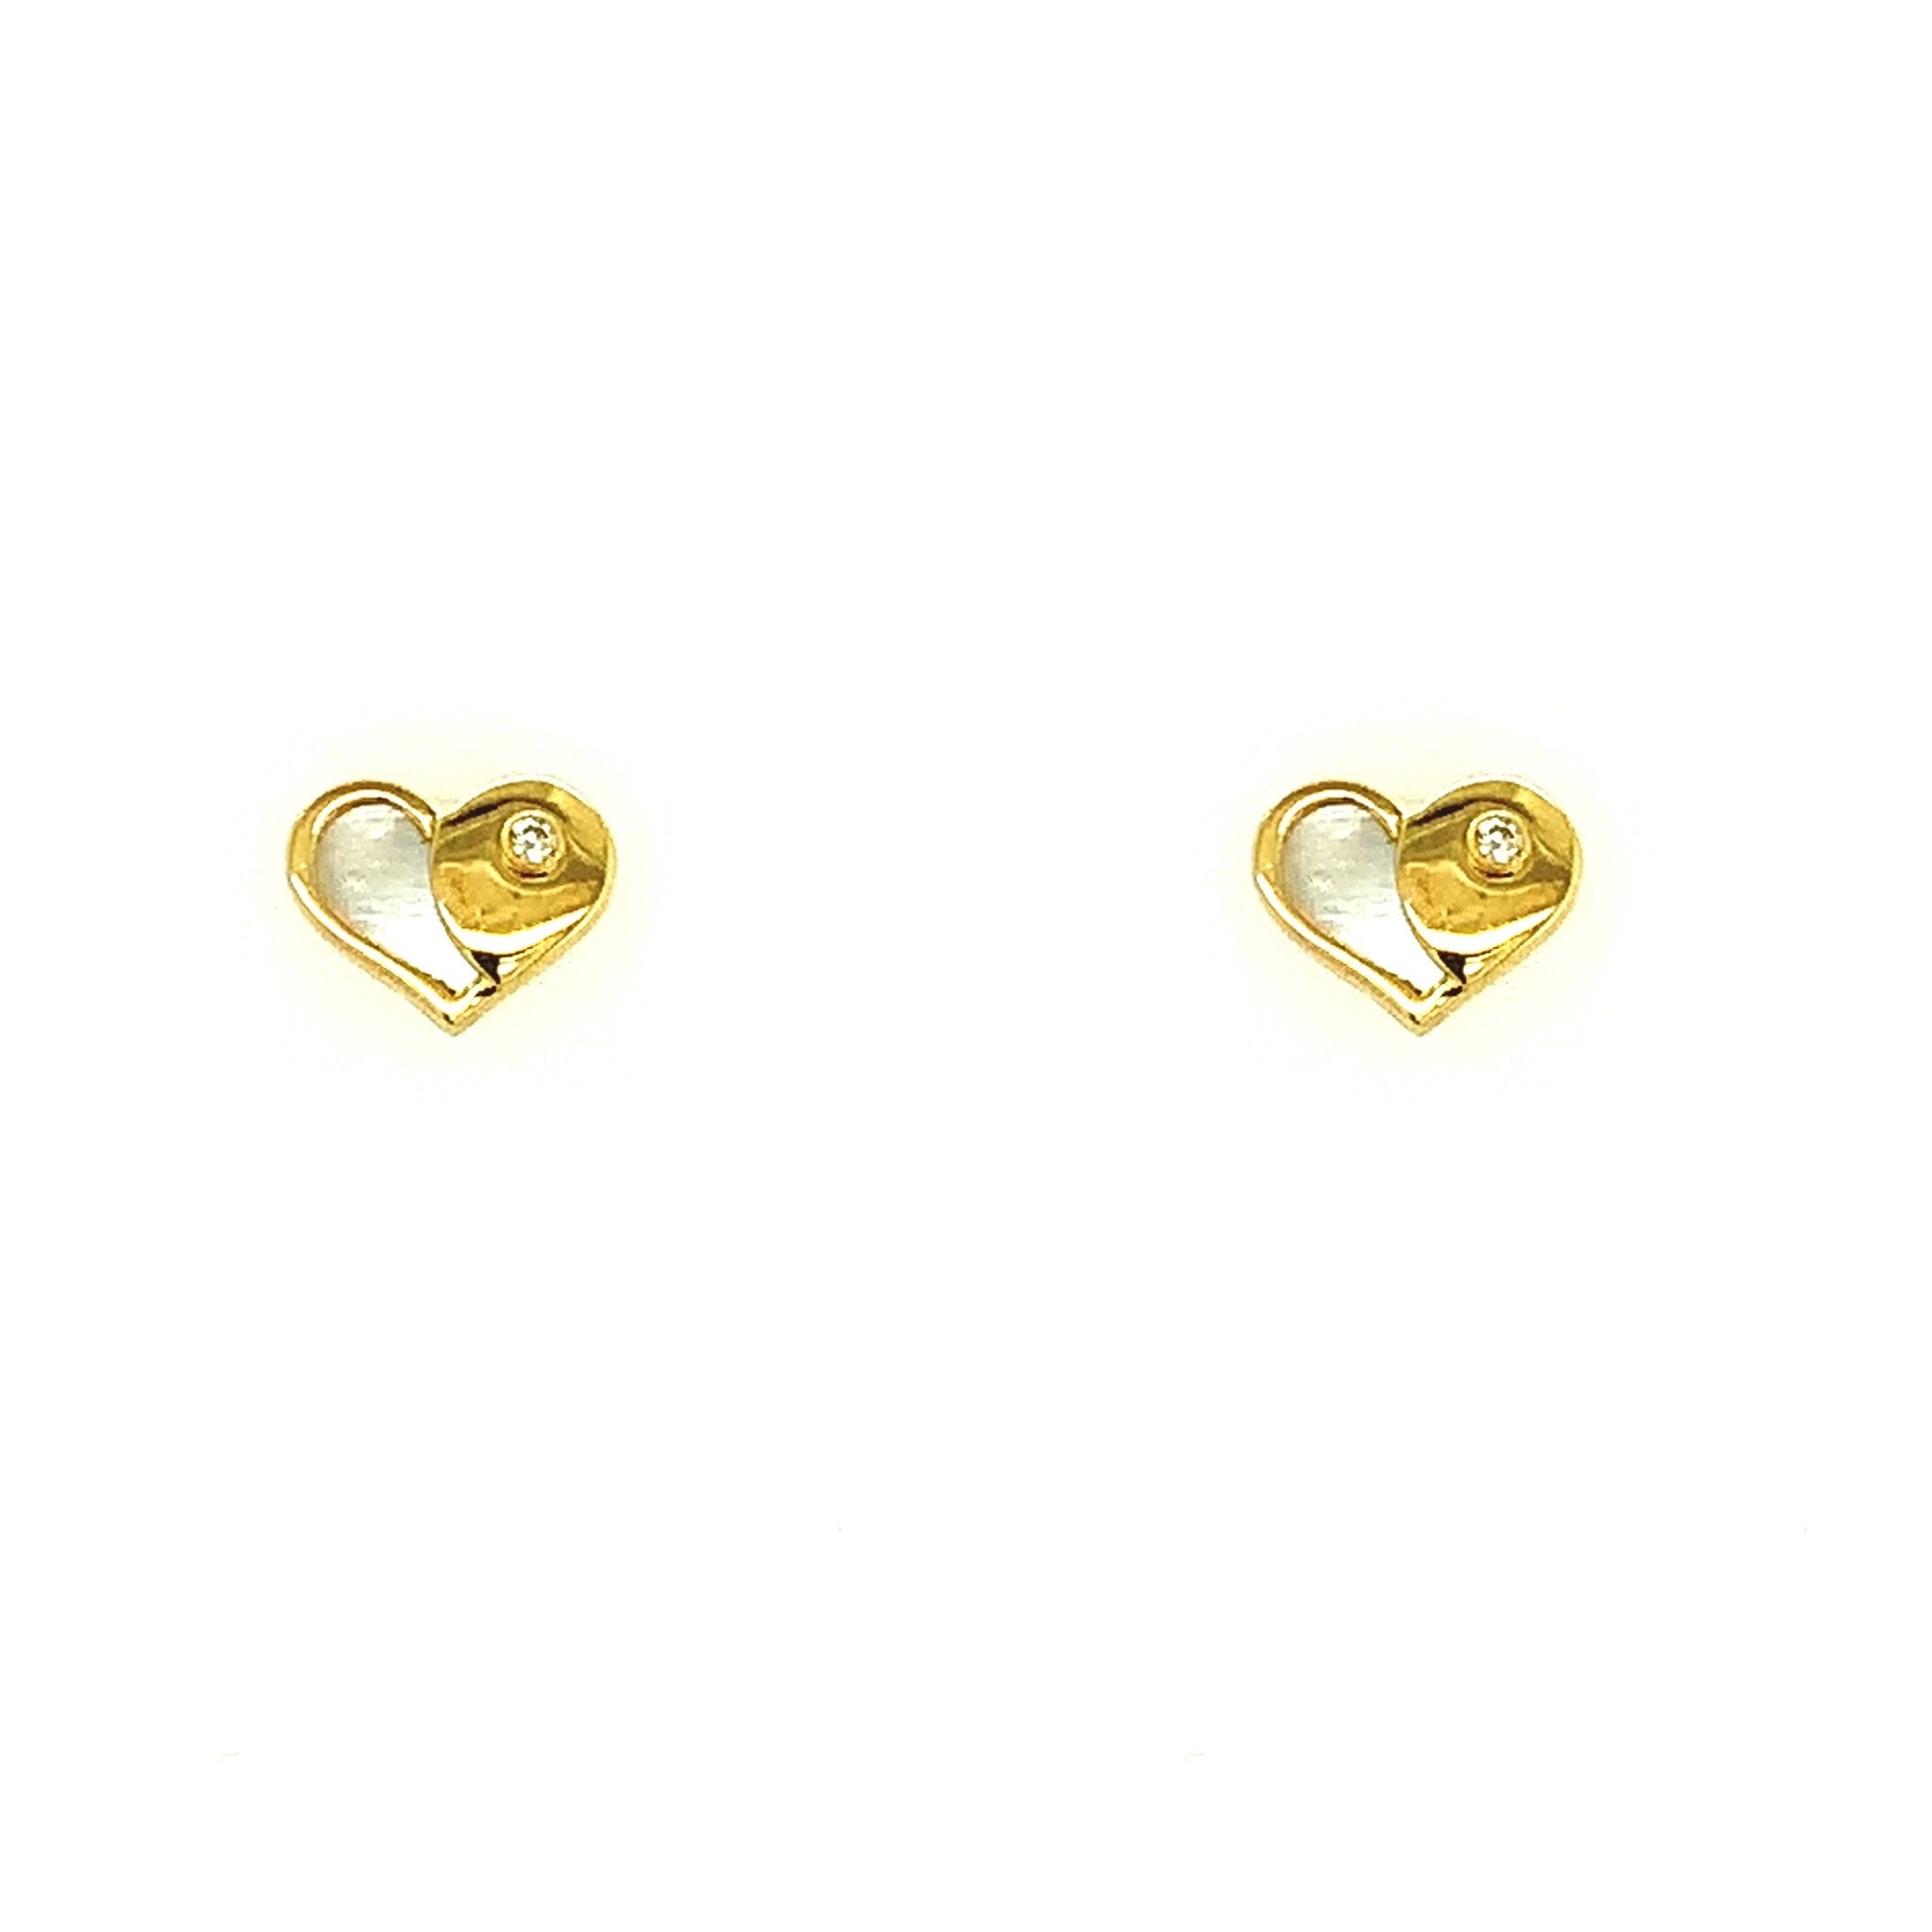 30518 18K YELLOW GOLD MOTHER OF PEARL AND CUBIC ZIRCONIA HIGH POLISH HEART SCREW BACK STUDS